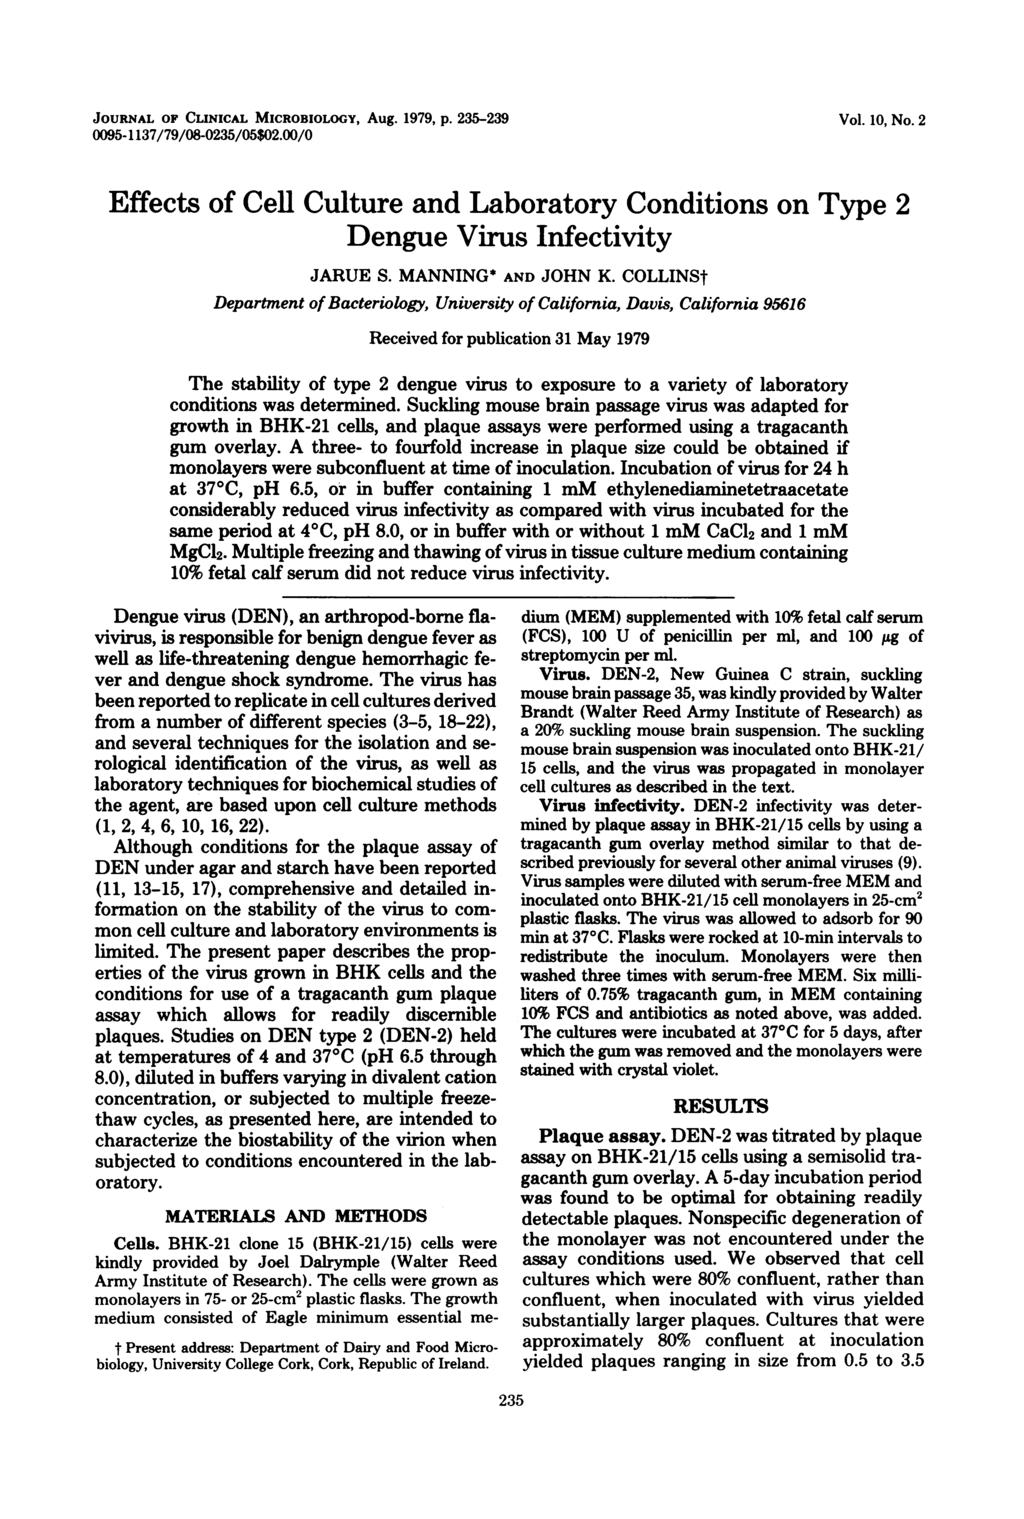 JOURNAL OF CLINICAL MICROBIOLOGY, Aug. 1979, p. 235-239 0095-1137/79/08-0235/05$02.00/0 Vol. 10, No. 2 Effects of Cell Culture and Laboratory Conditions on Type 2 Dengue Virus Infectivity JARUE S.